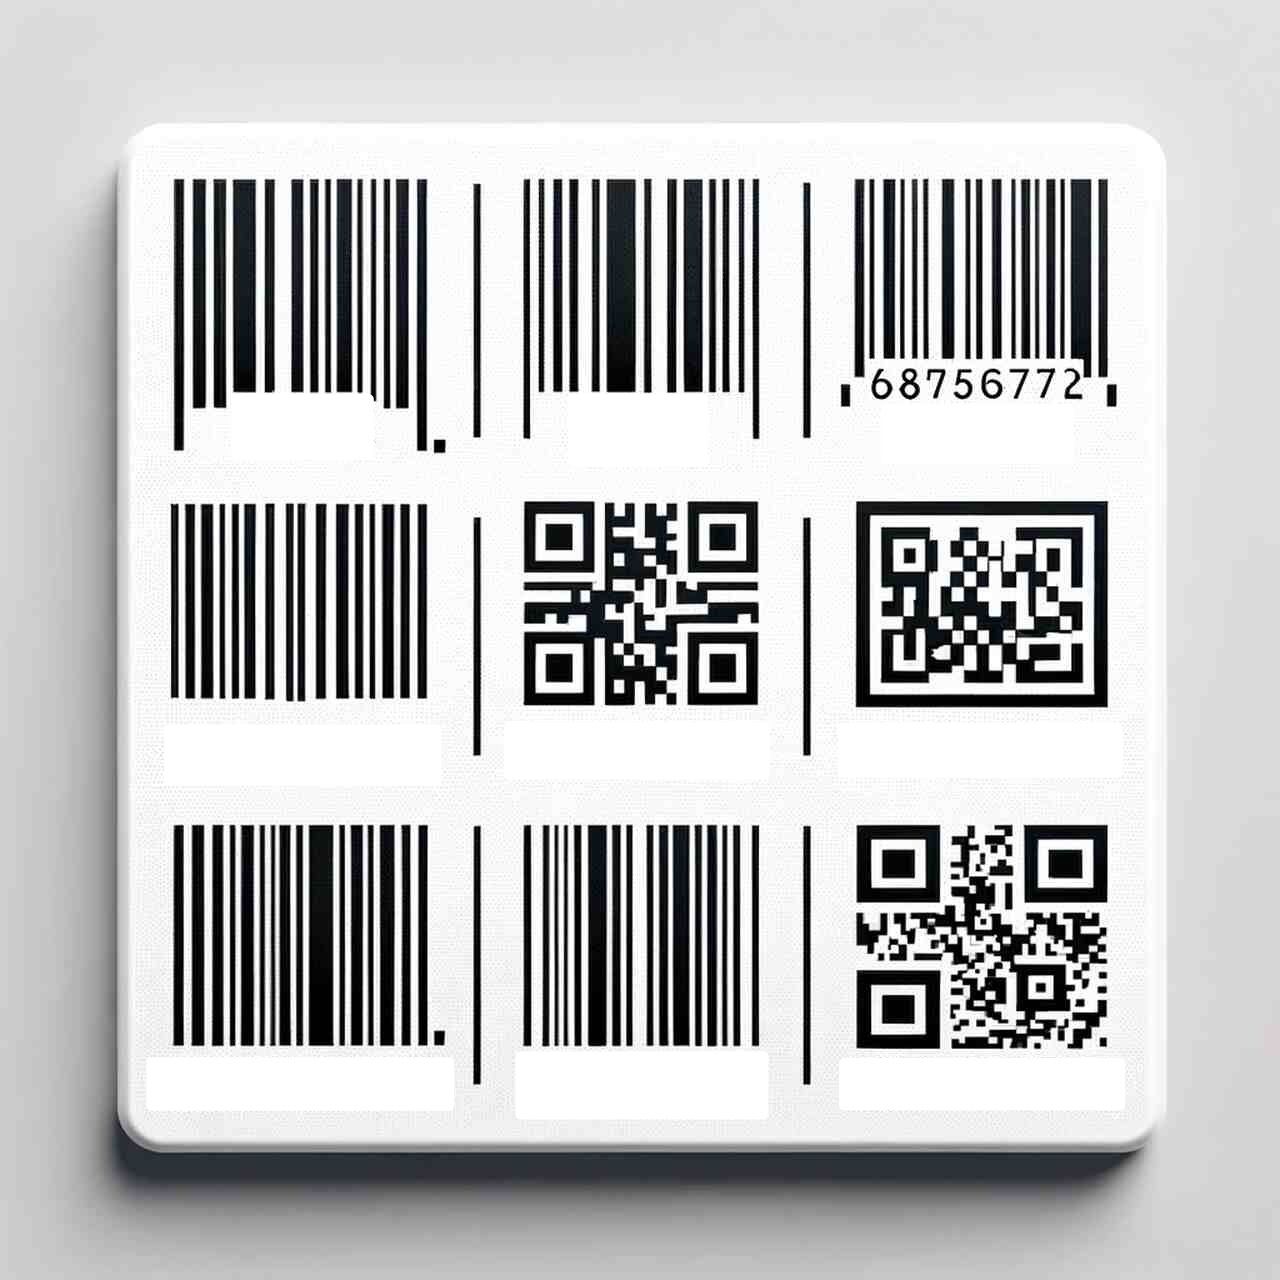 the different types of barcodes as representations